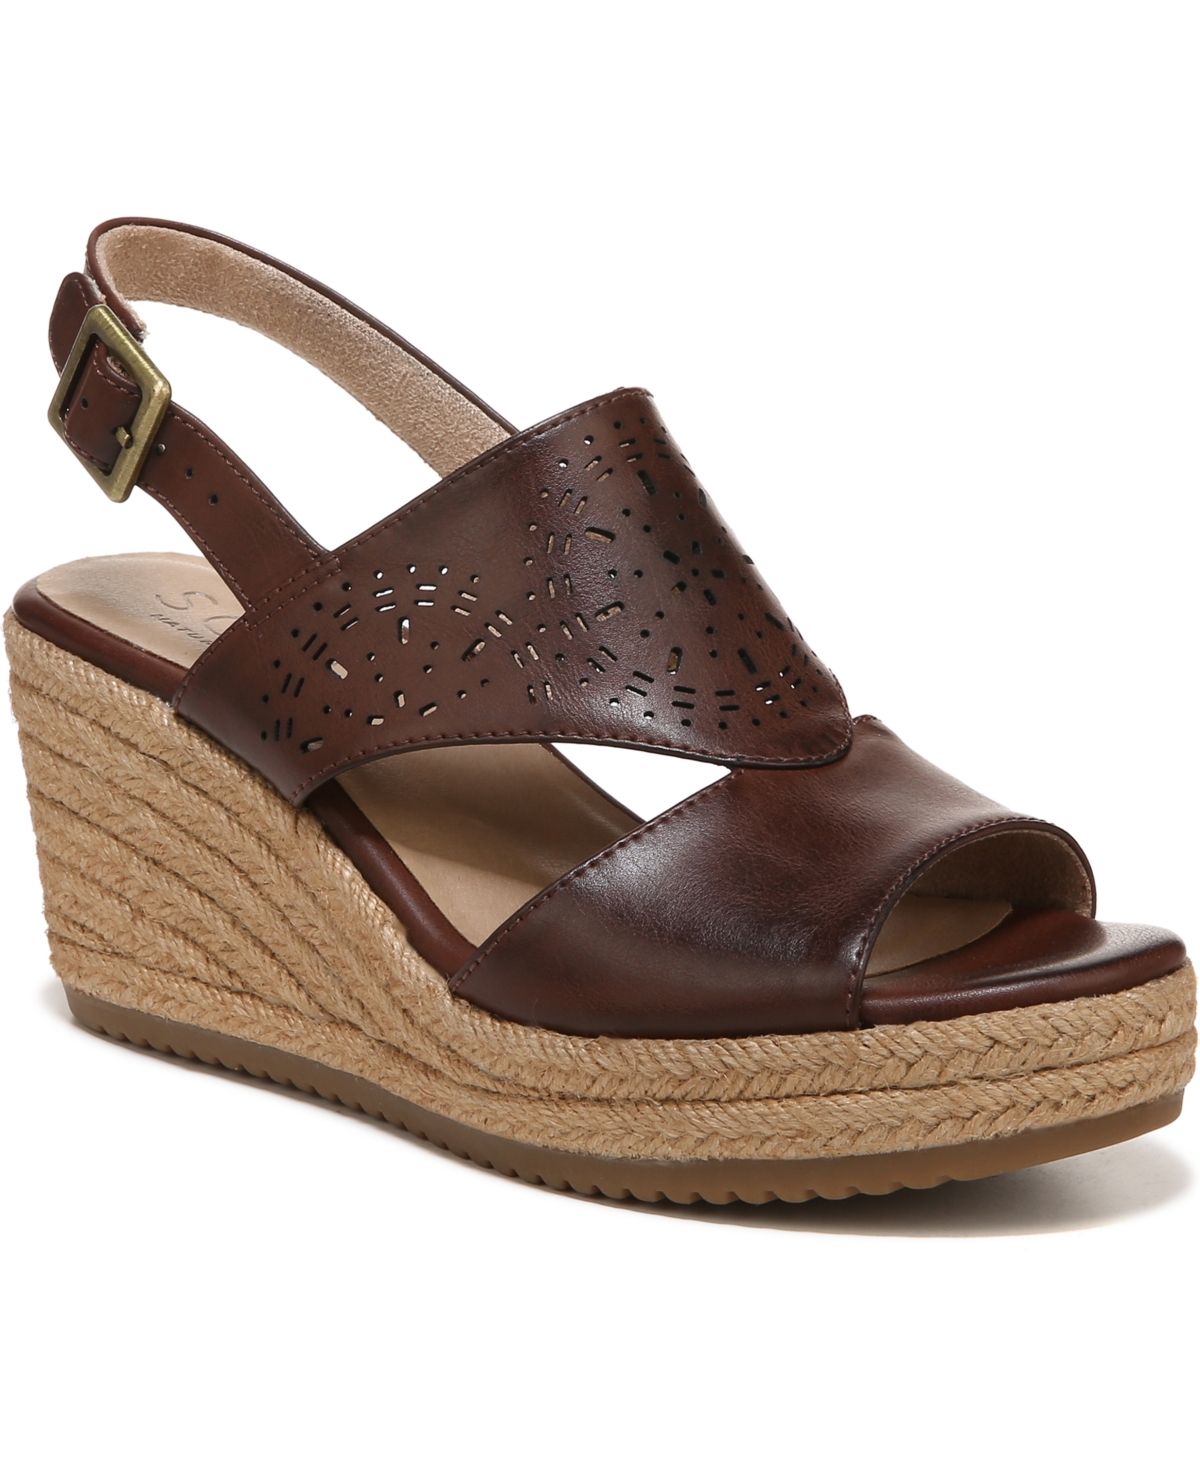 Soul Naturalizer Ocean Slingback Wedge Sandals Women's Shoes In Coffee Bean Faux Leather